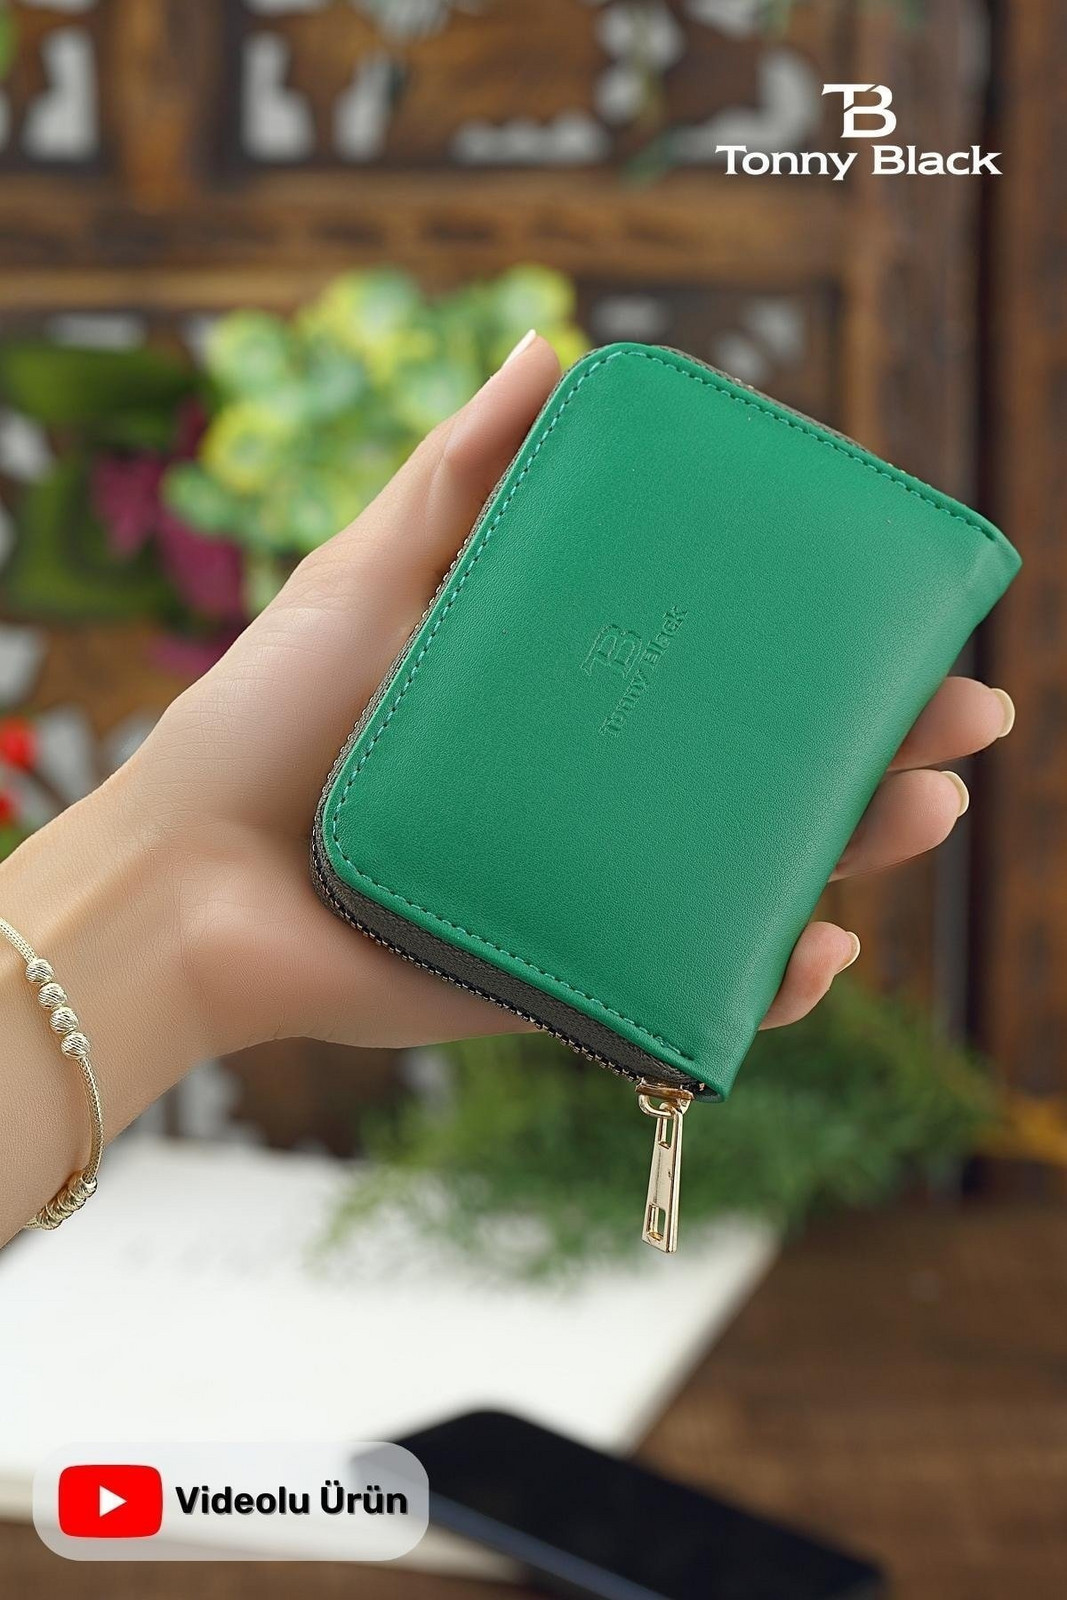 Tonny Black Original Women's Card Holder coin compartment with a zipper compartment. Comfort Model. Stylish Mini Wallet with Card Holder Green.